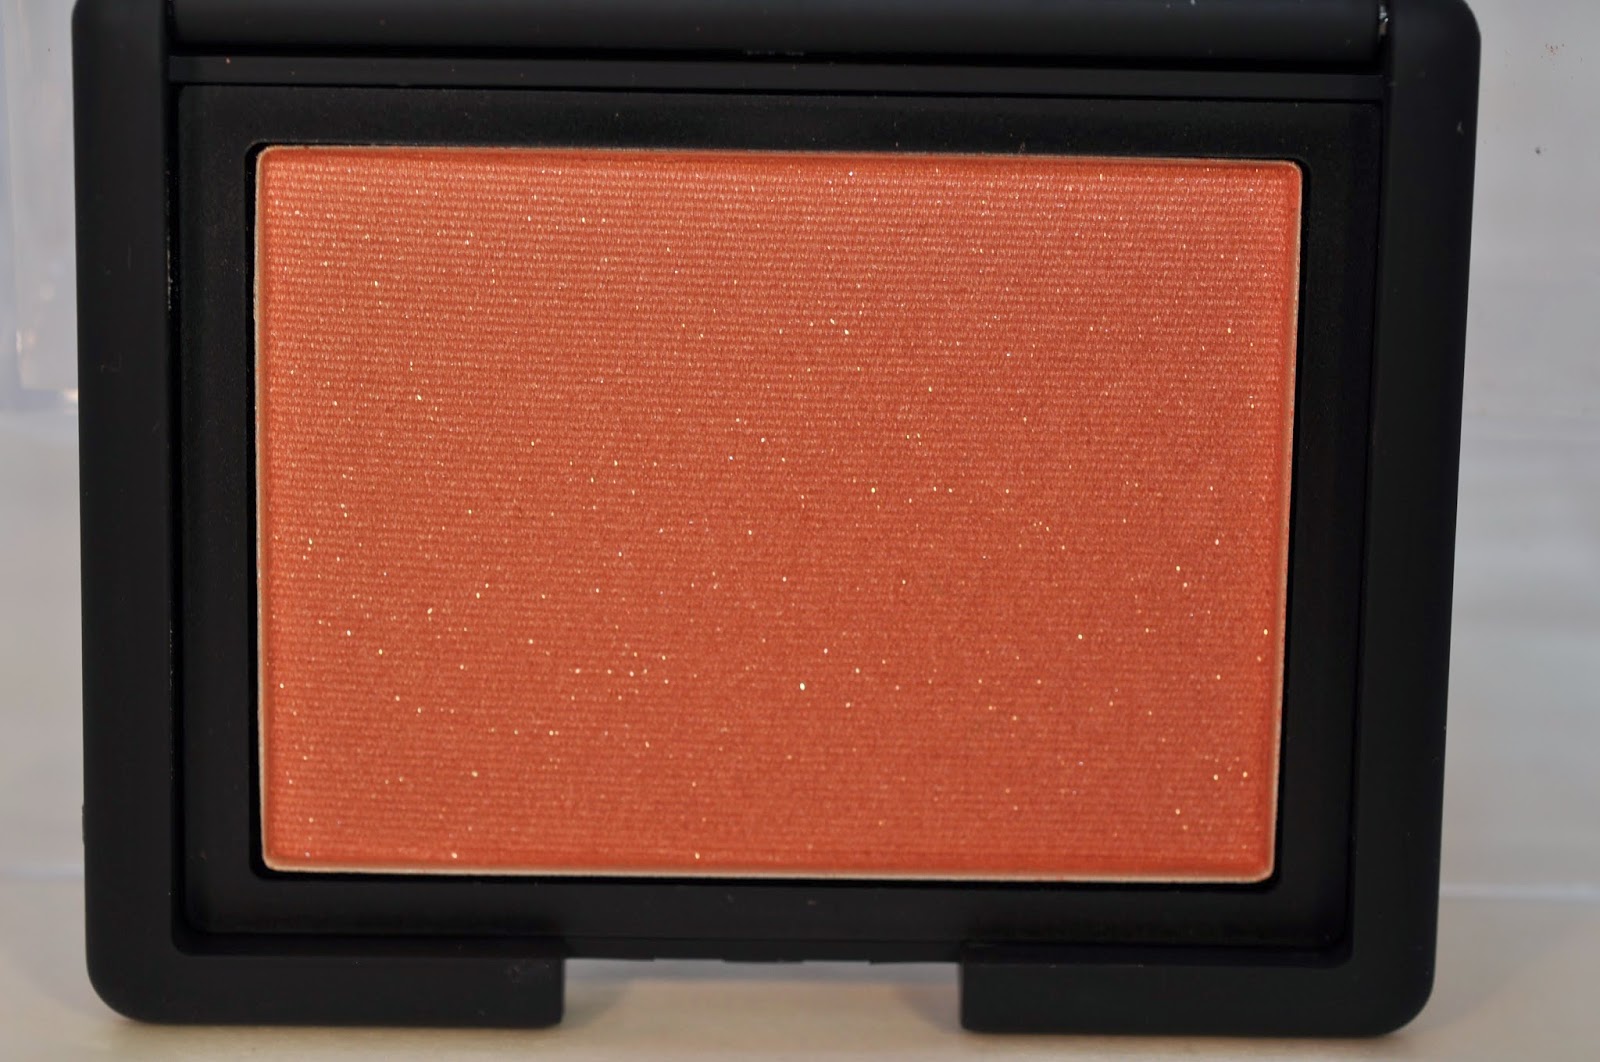 NARS Blush Collection 2014 + Swatches 